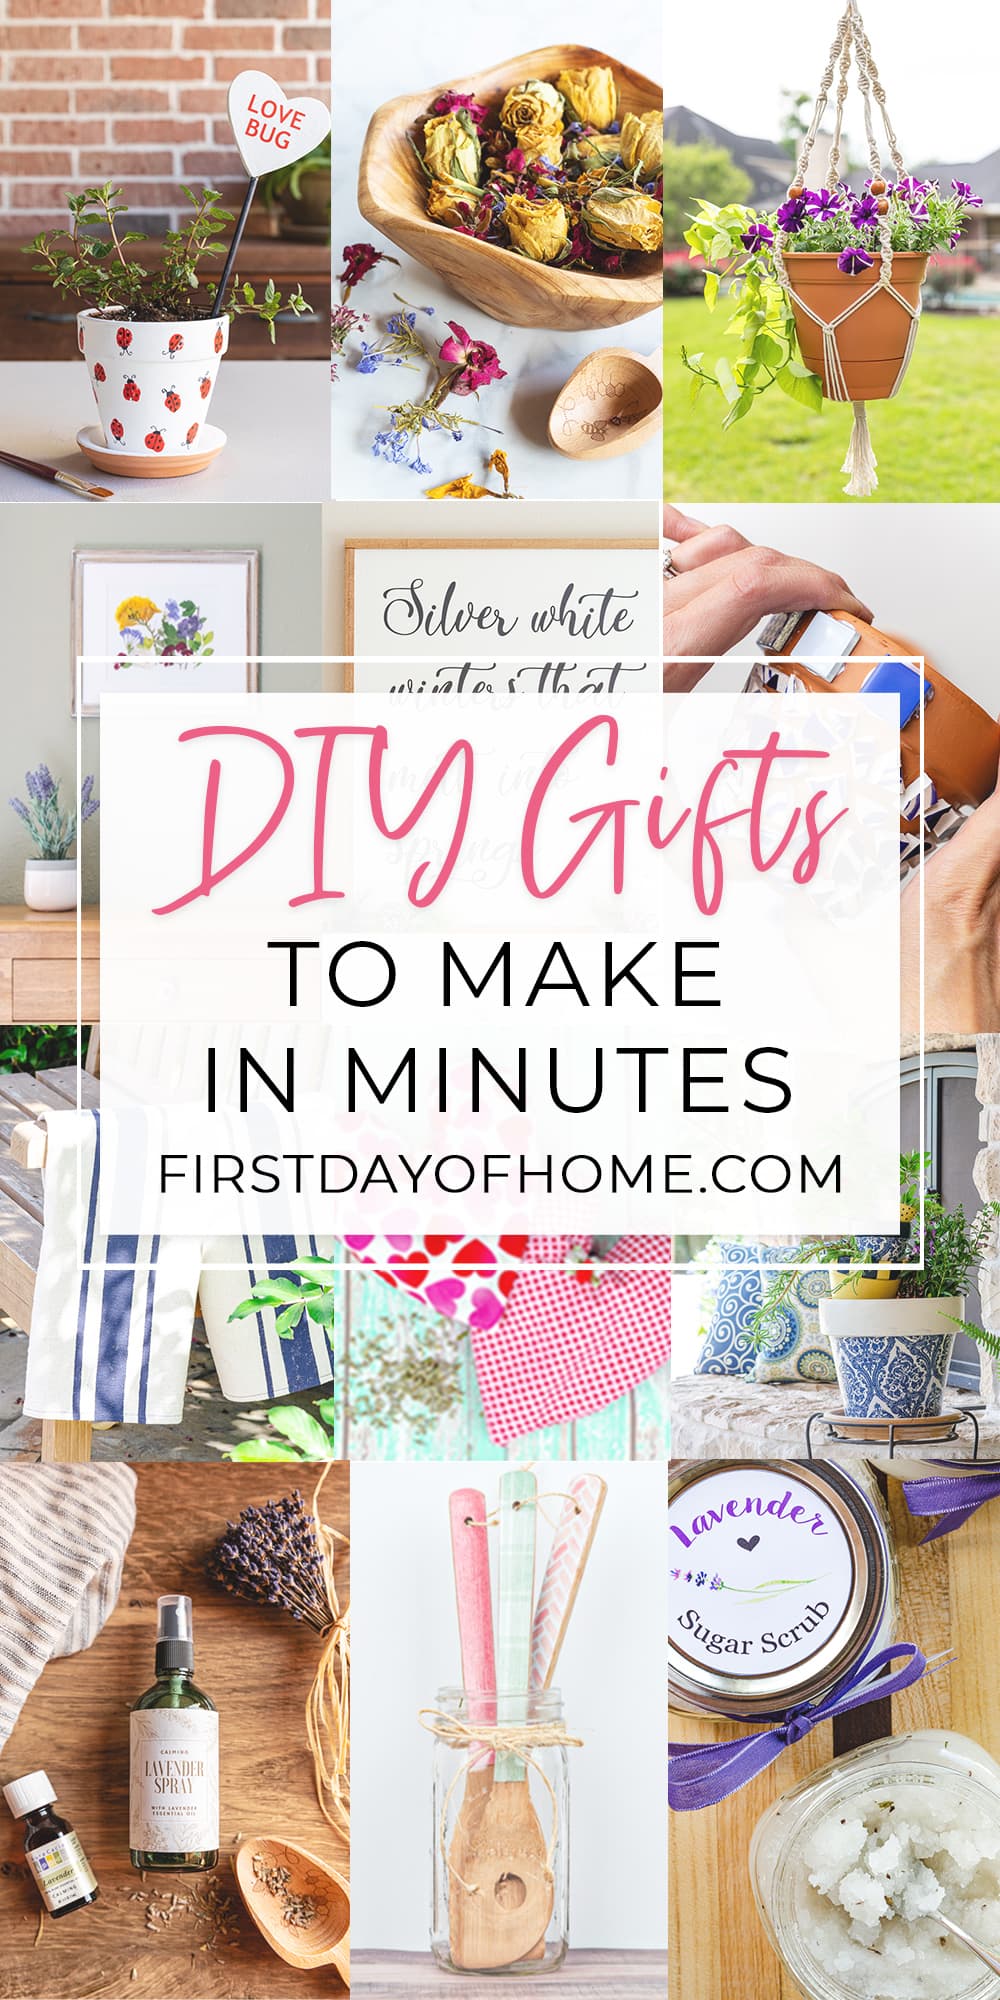 Collage of arts and crafts projects with text overlay reading "DIY Gifts to Make in Minutes".